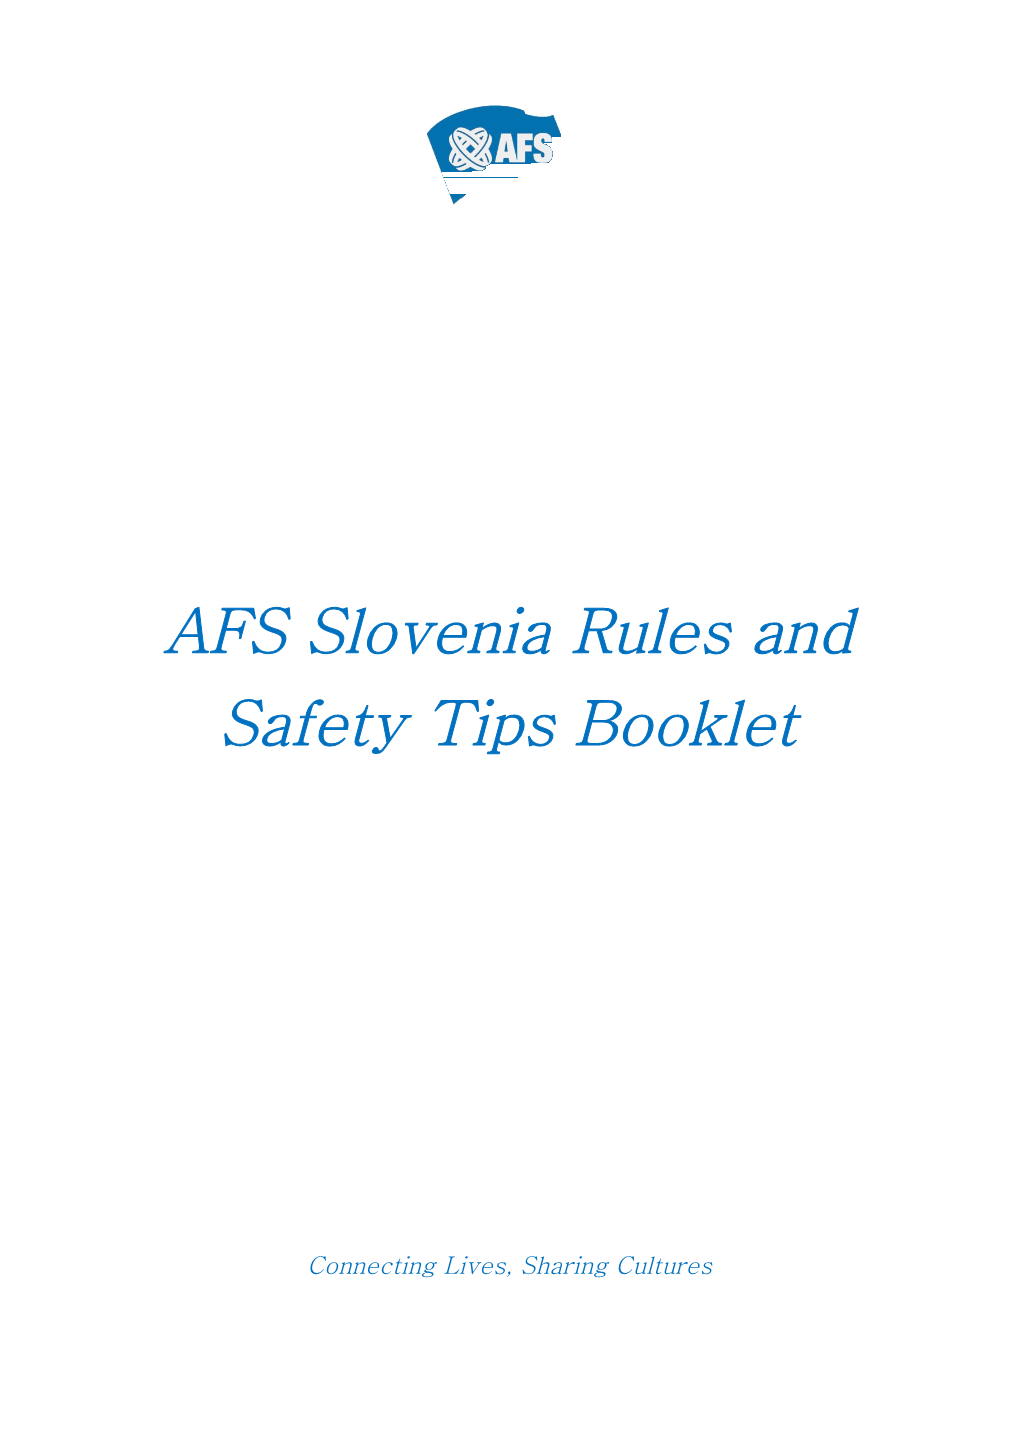 AFS Slovenia Rules and Safety Tips Booklet